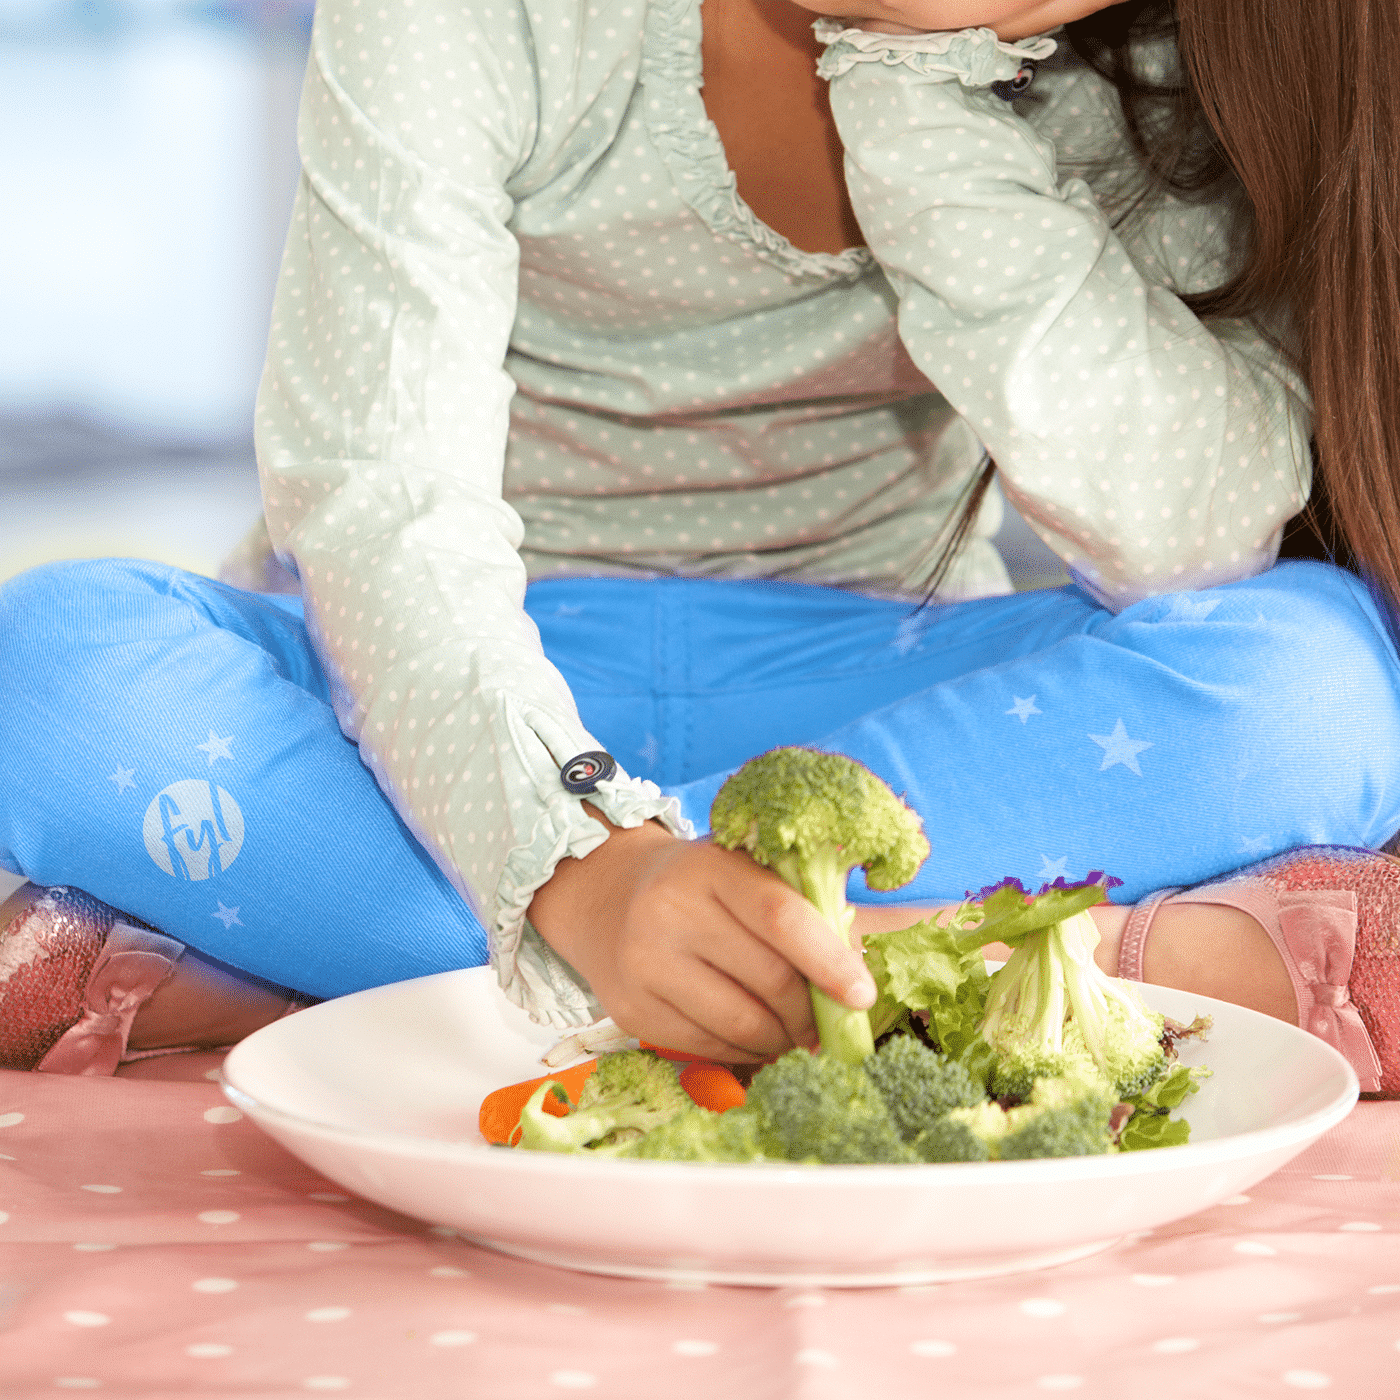 Managing Mealtimes with Fussy Eaters